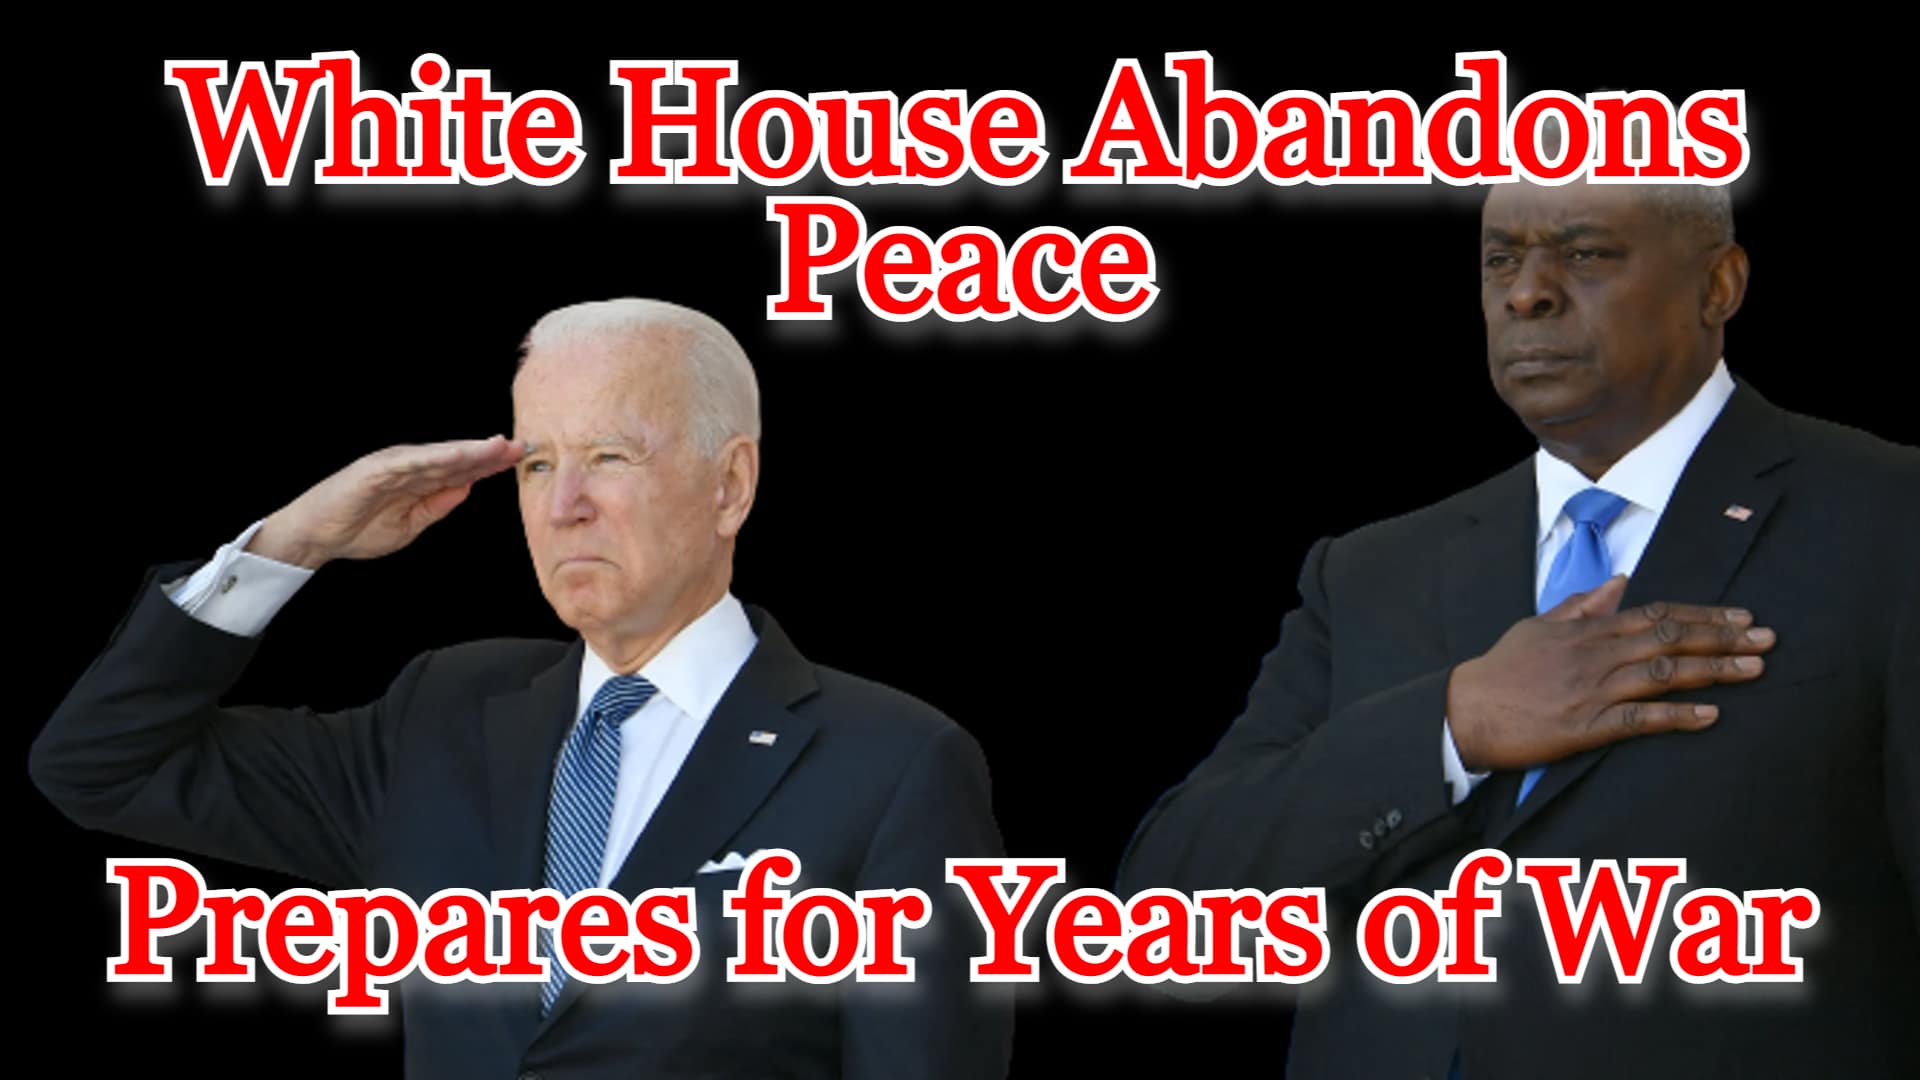 COI #336: White House Abandons Peace, Prepares for Years of War